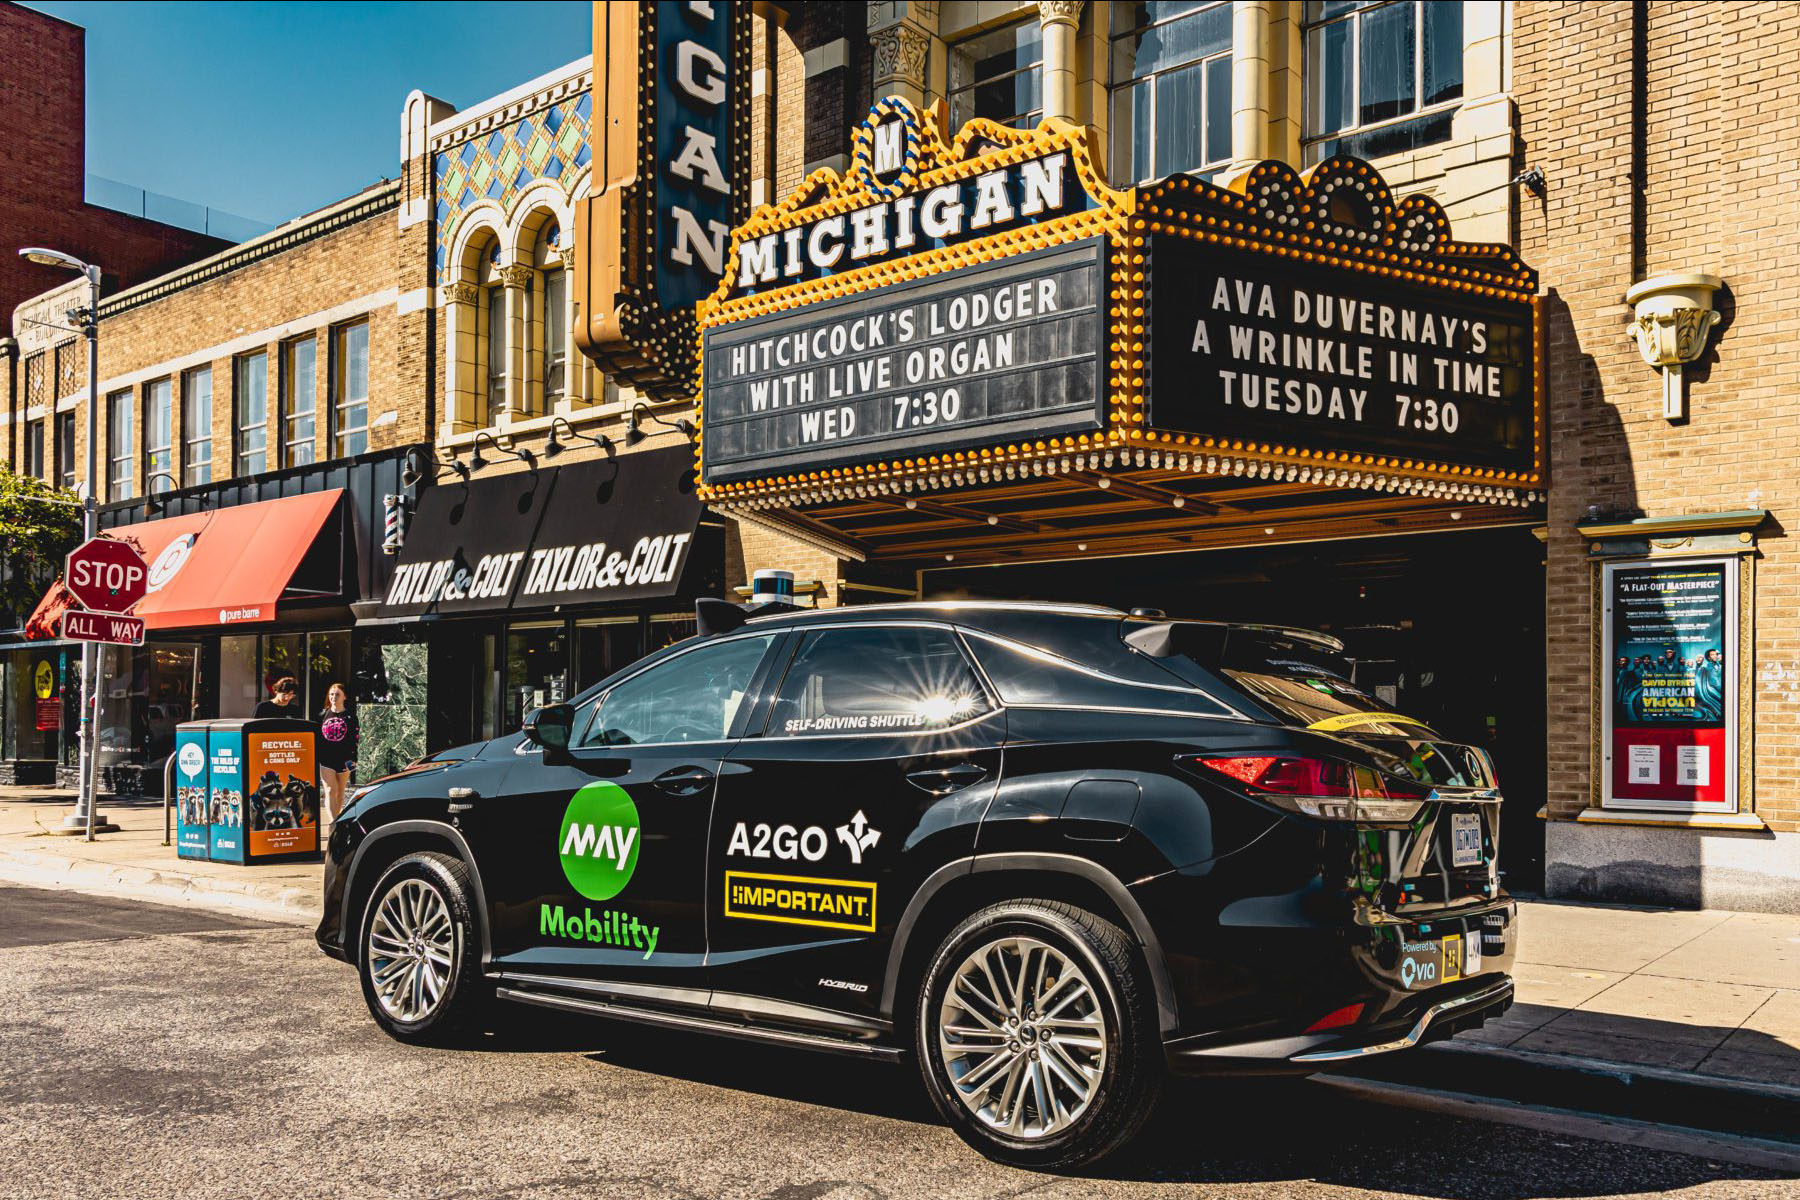 A2GO black Lexus vehicle parked outside the Michigan Theater in Ann Arbor, MI